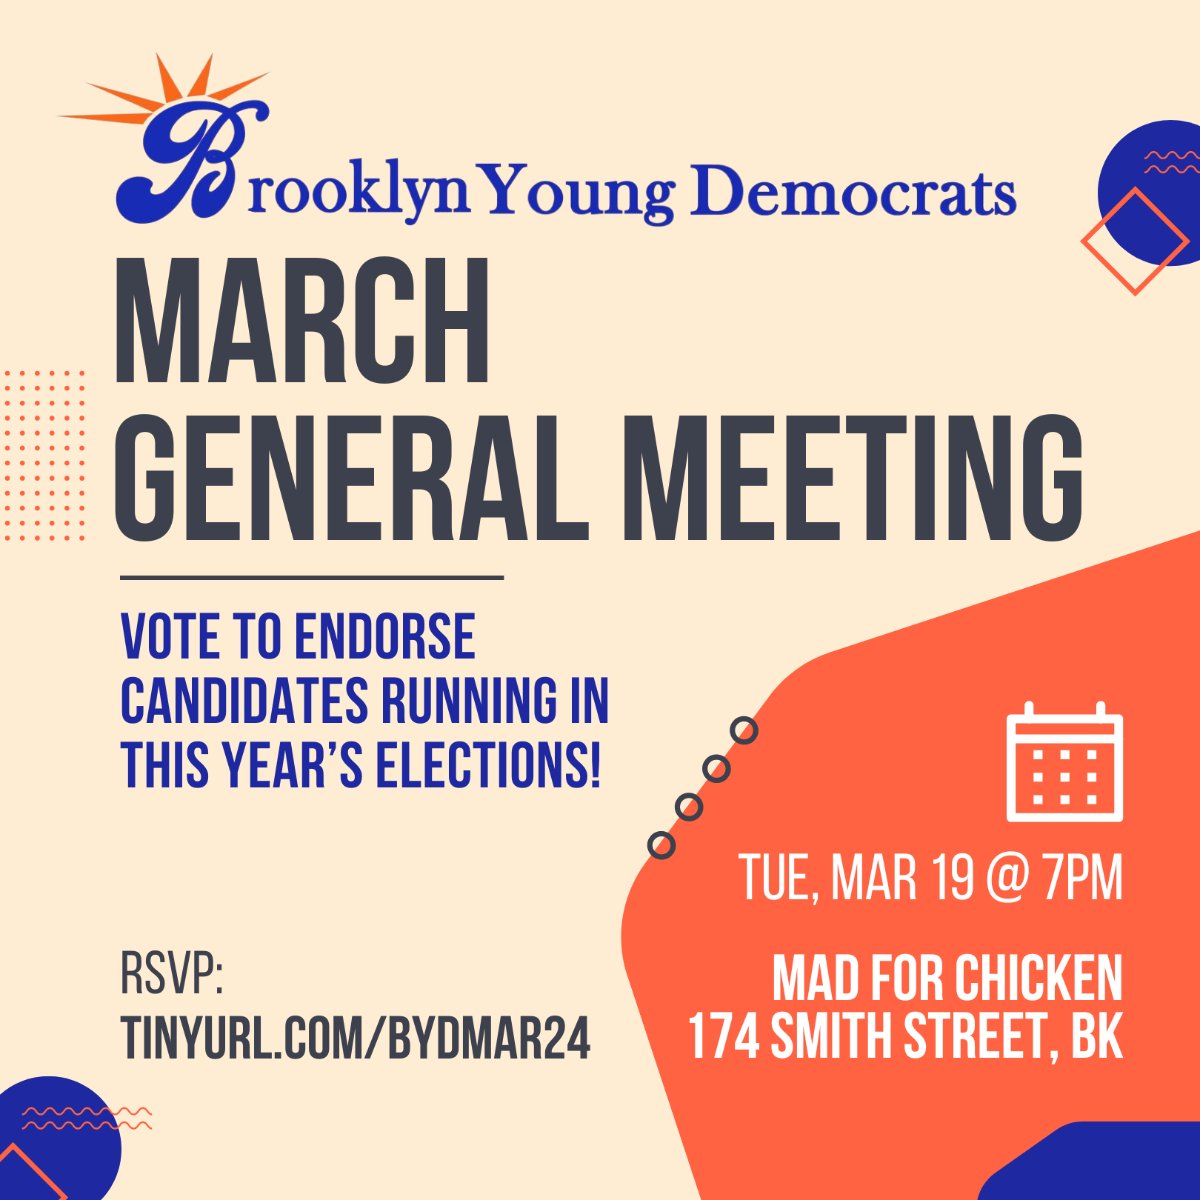 Join us Tuesday to hear from candidates seeking BYD's endorsement! We'll consider candidates from State Senate Districts 17, 18, 26, 59; Assembly District 52; and the presidential primary. Hear their vision for Brooklyn, and ask questions! RSVP: tinyurl.com/BYDMAR24